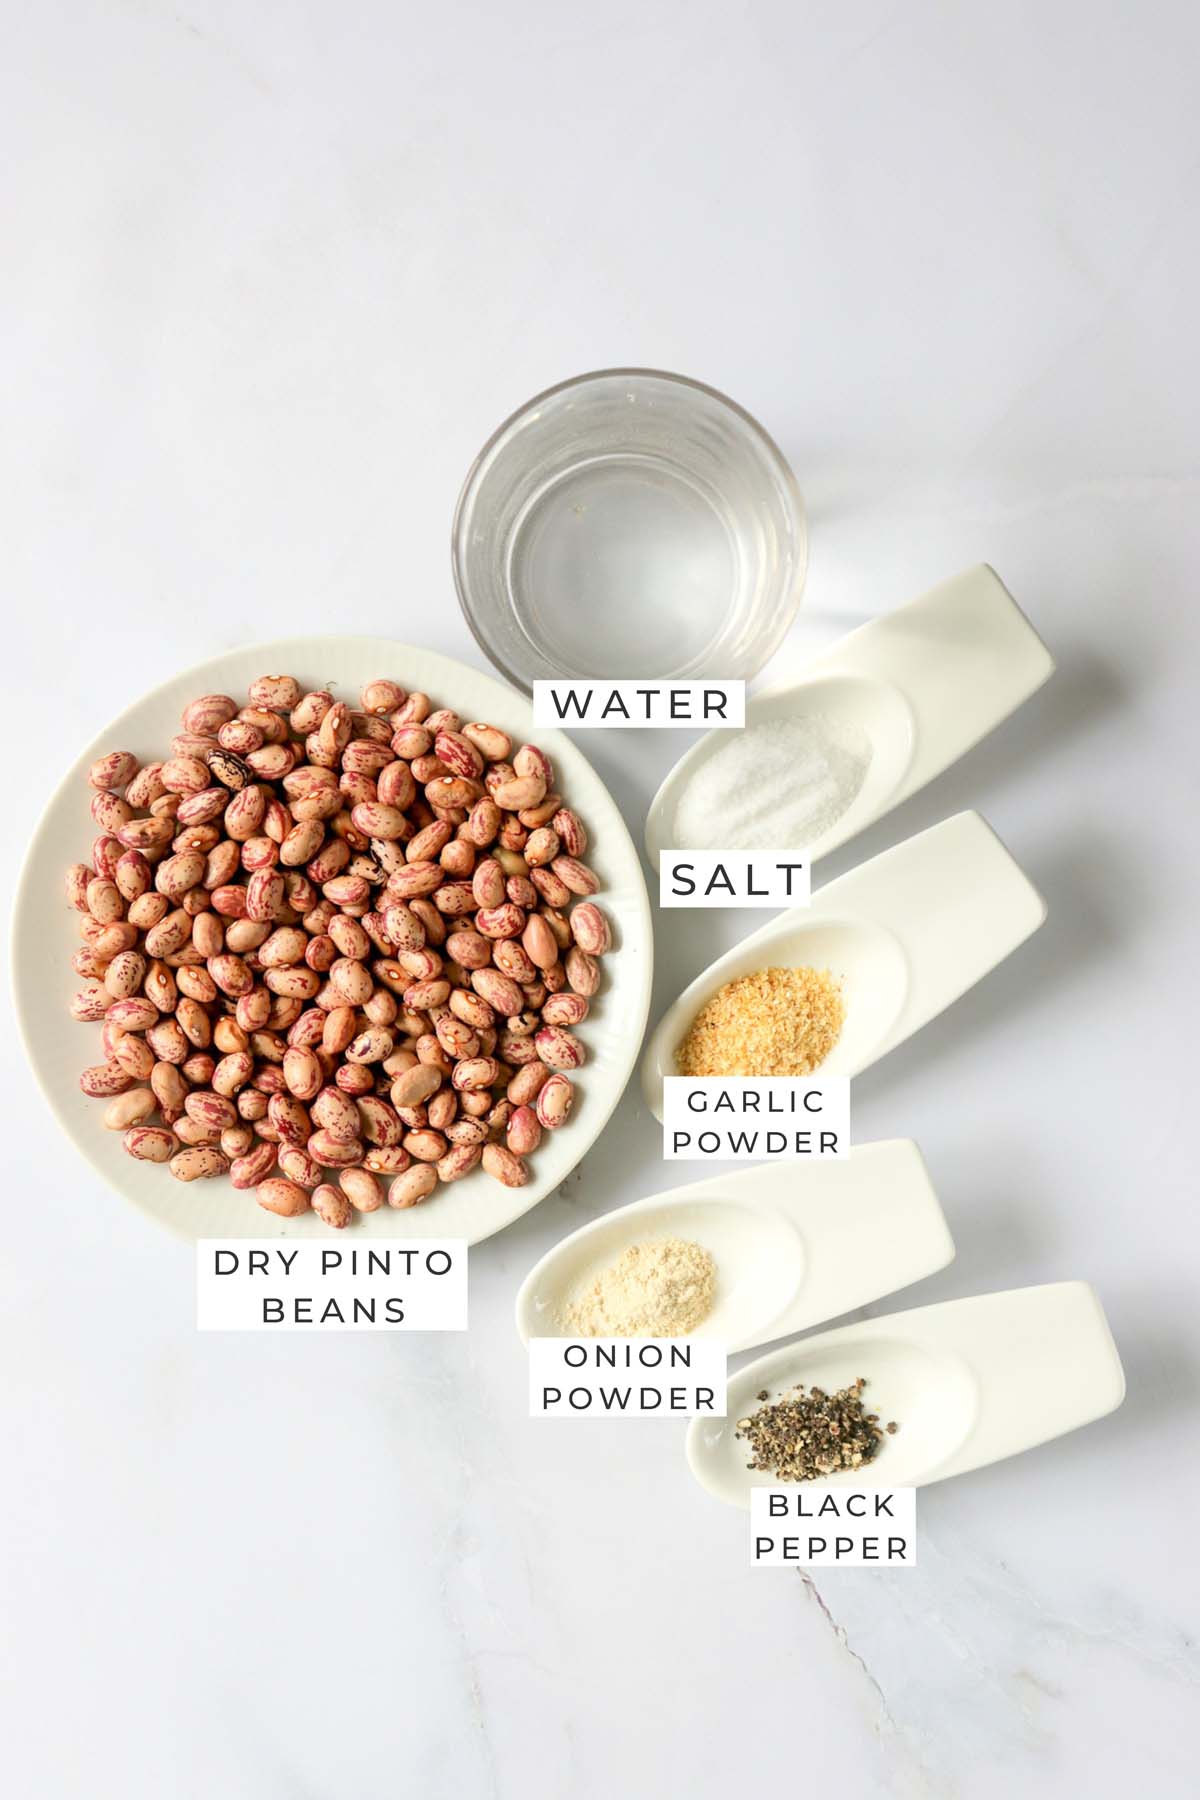 Labeled ingredients for the pinto beans.